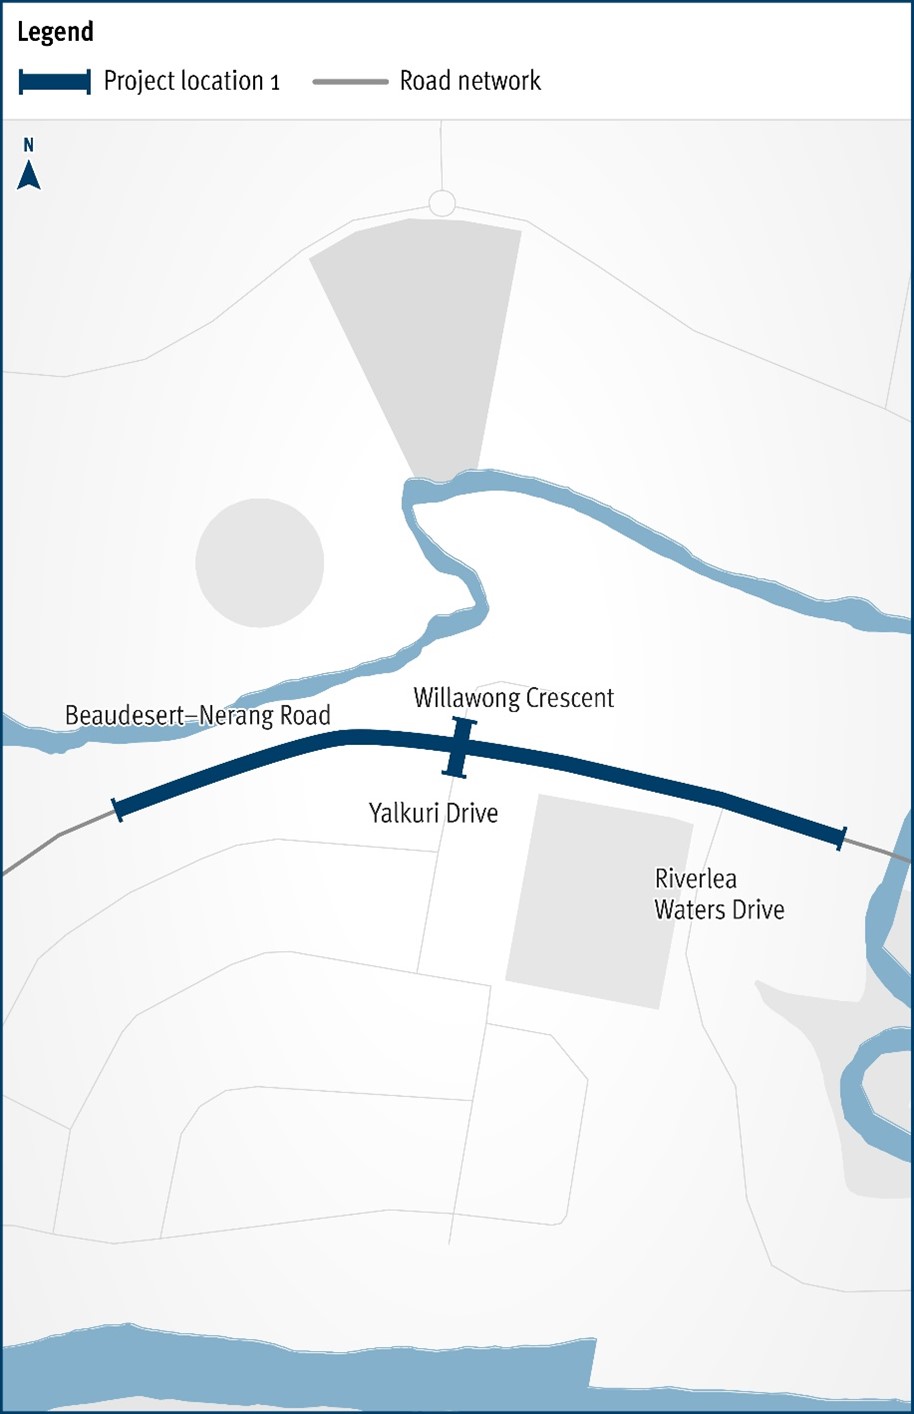 The map shows the locality of the proposed Beaudesert-Nerang Road, Yalkuri Drive and Willawong Crescent intersection upgrade. Beaudesert is located to the west and Nerang to the east of the project location. A solid dark blue line indicates the project extent, which encompasses Yalkuri Drive south of the intersection and Willawong Crescent north of the intersection, as well as Beaudesert–Nerang Road, which is located west and east of the intersection. The local road network, Riverlea Waters Drive is also highlighted on the map.